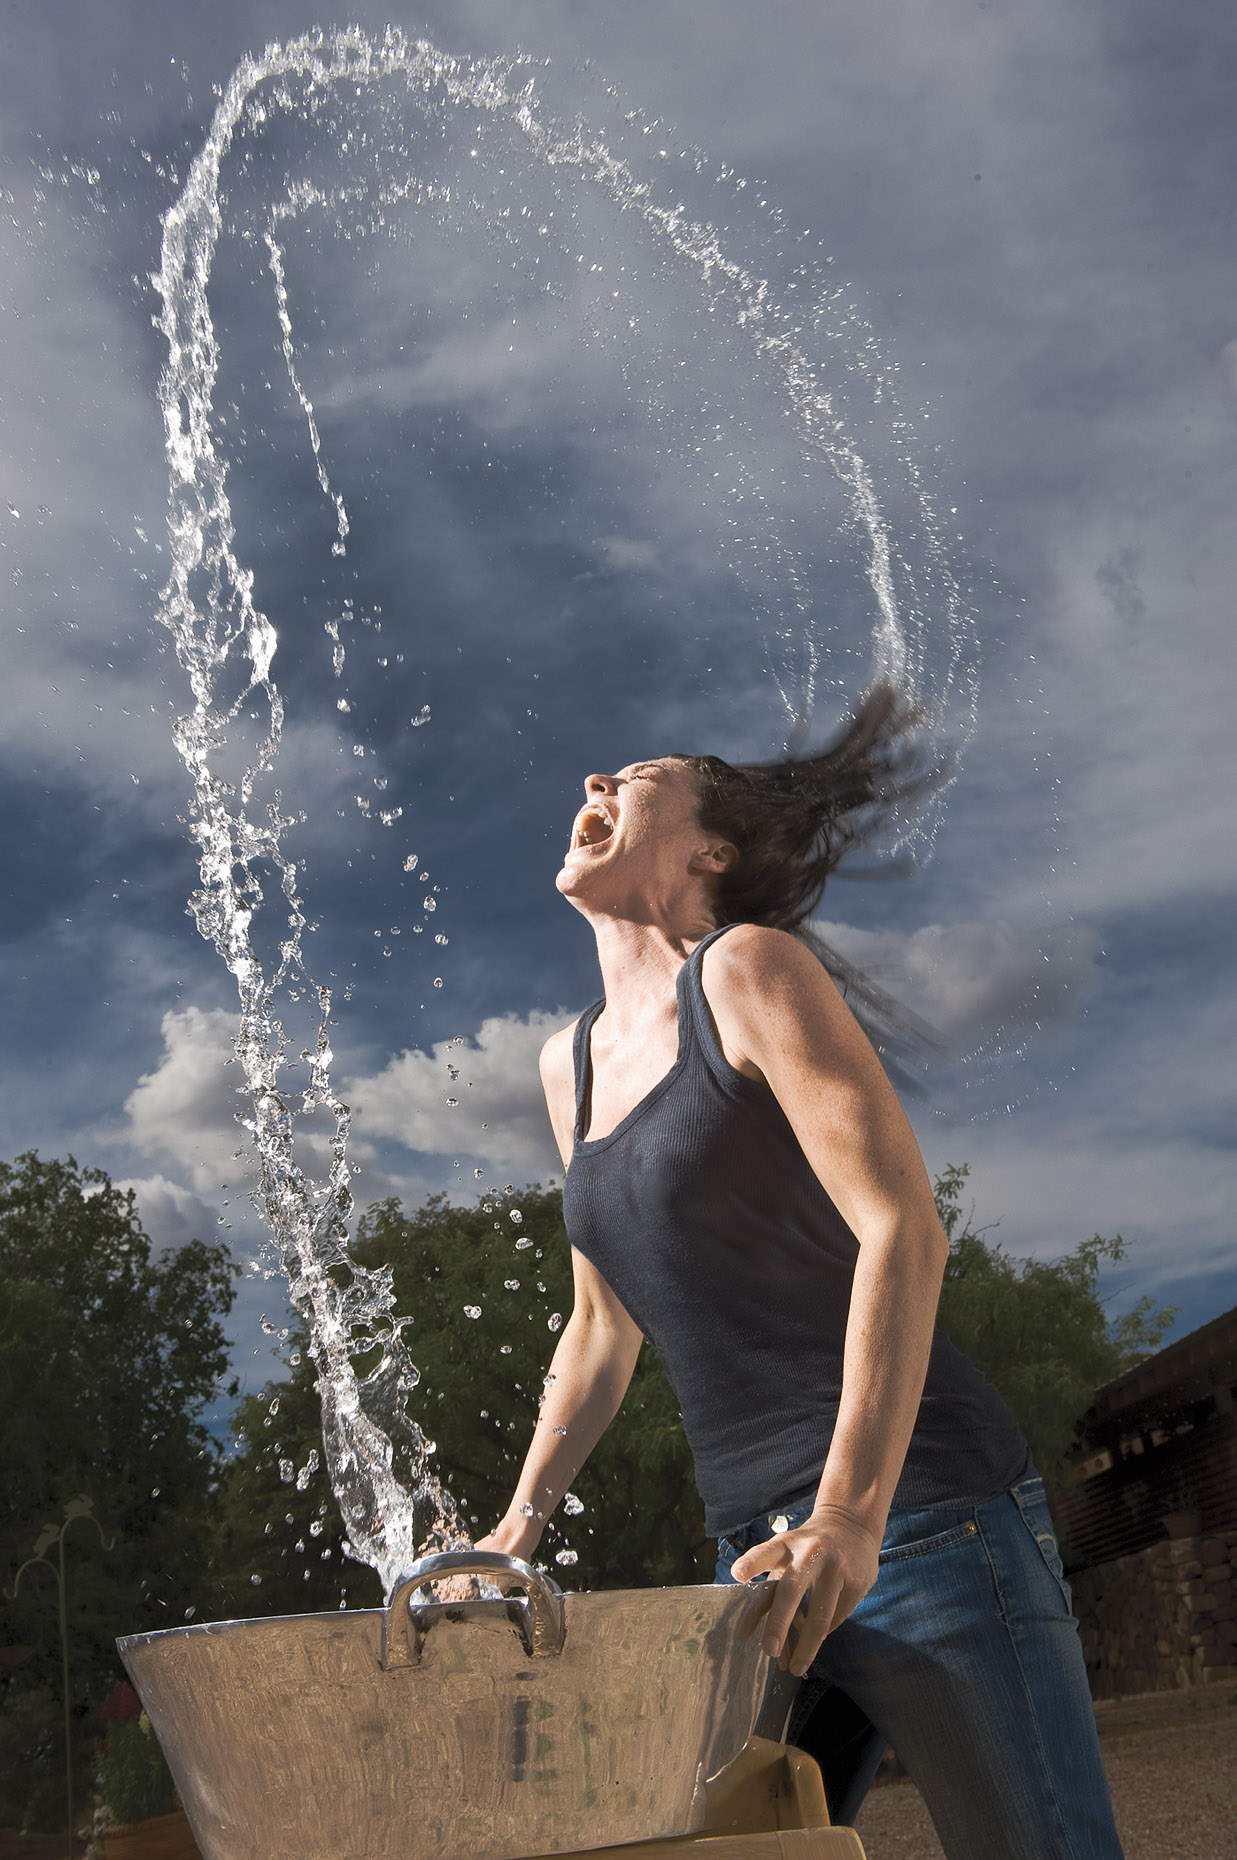 Dramatic portrait of woman throwing wet hair.